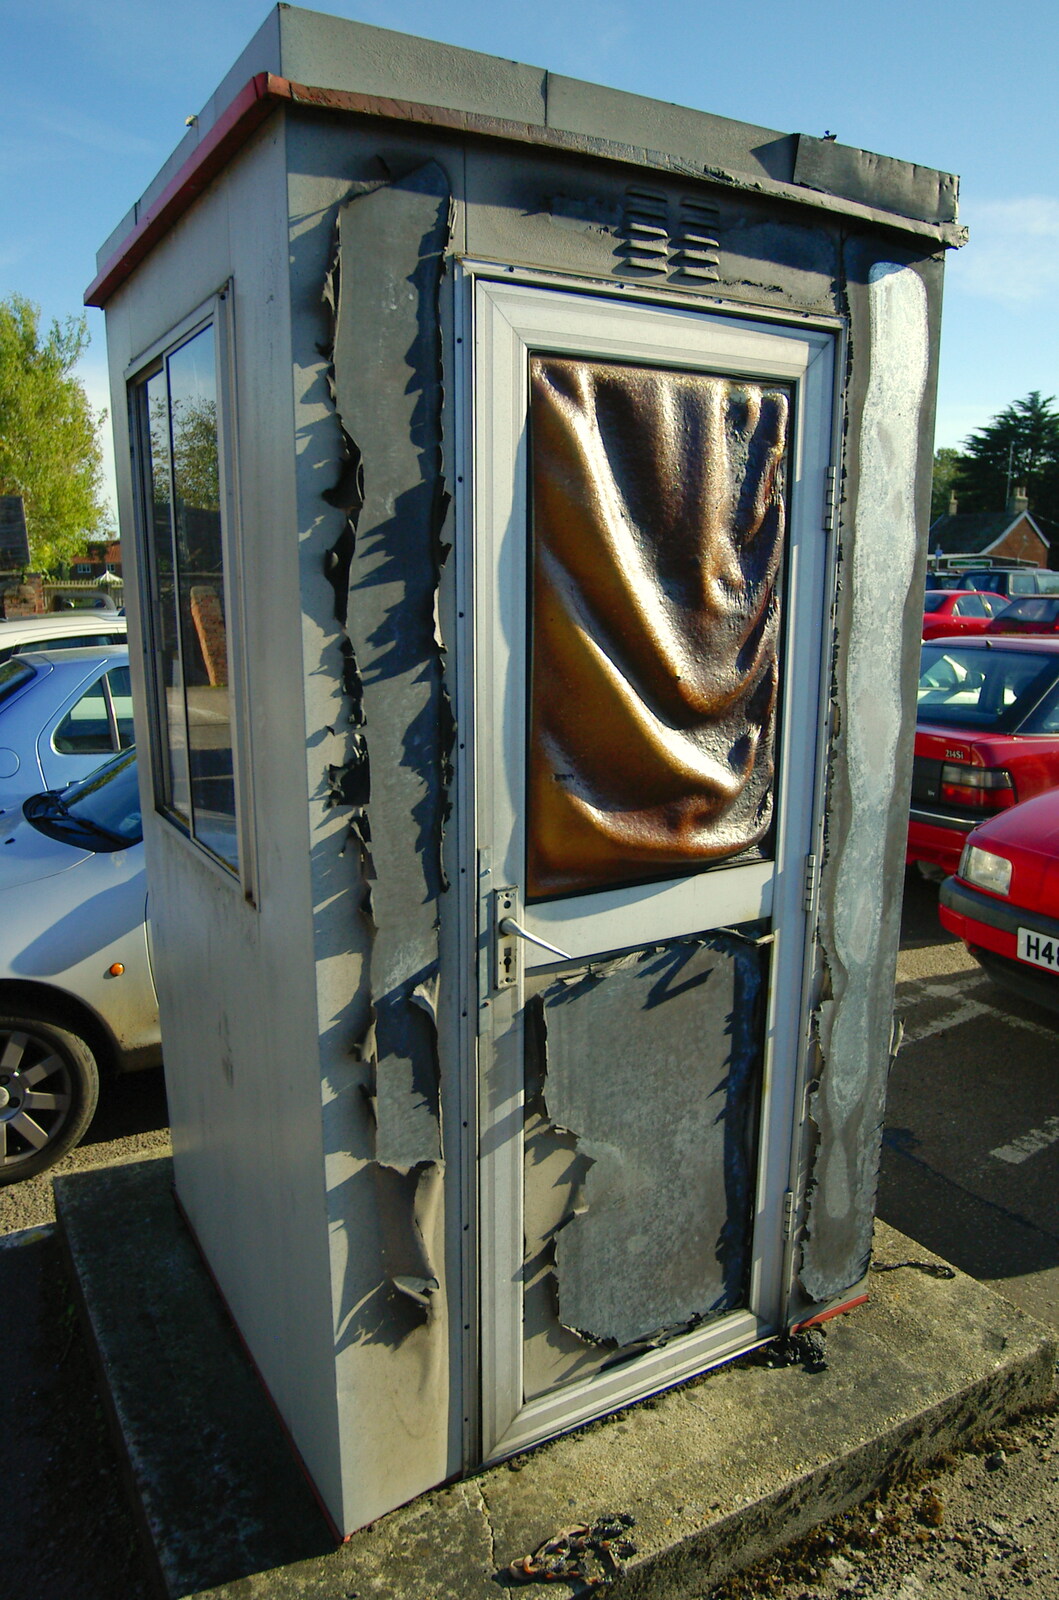 The melted door of the attendant's cubicle from Burnt-out Recycling Bins and Fireworks from a Distance, Diss, Norfolk - 4th November 2005